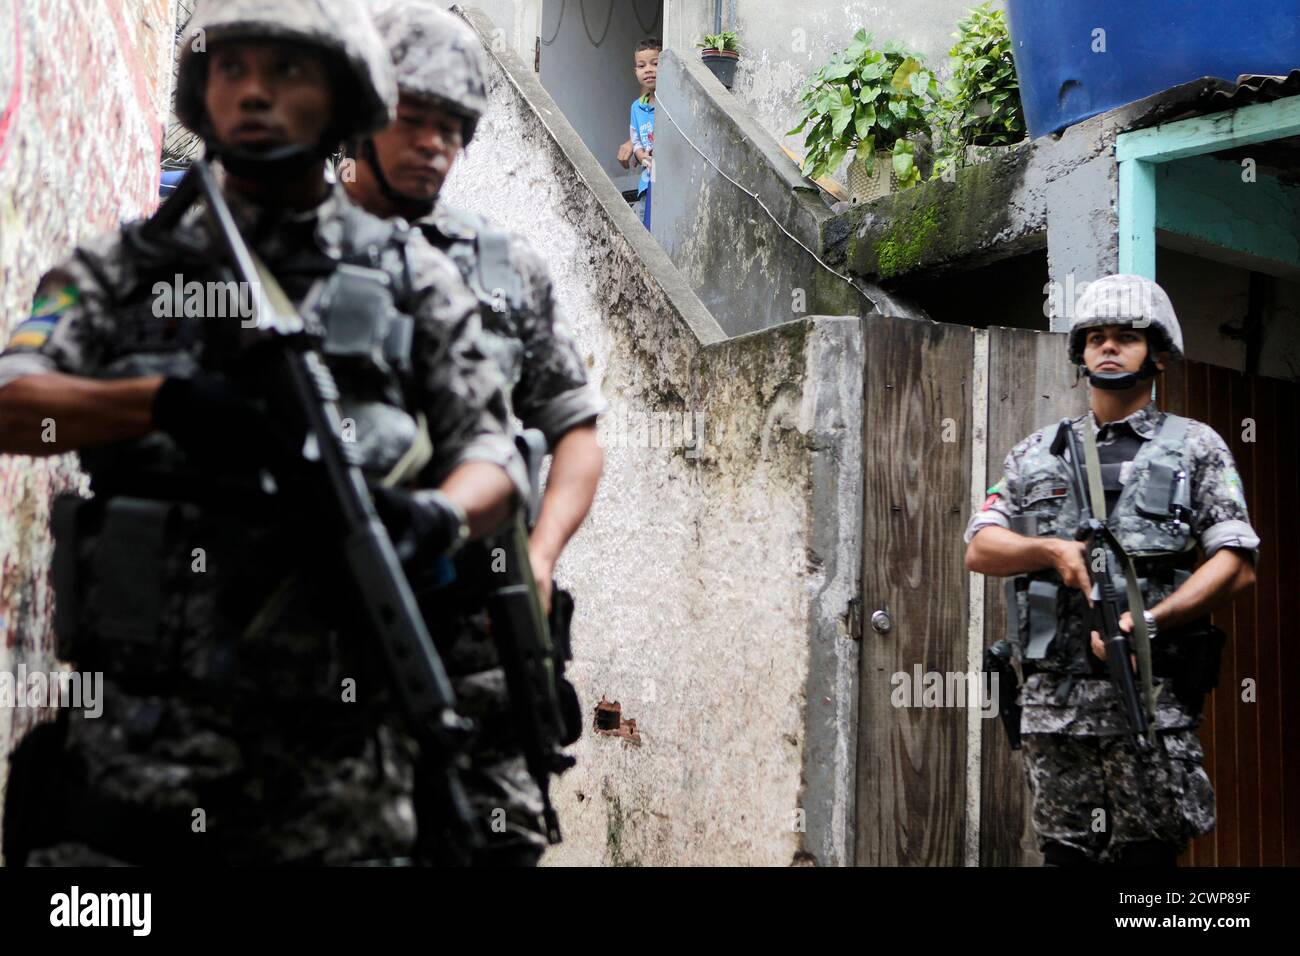 A boy looks on as Brazilian National Force policemen take part in an  operation against drugs in Santo Amaro slum in Rio de Janeiro May 18, 2012.  The Brazilian National Force is